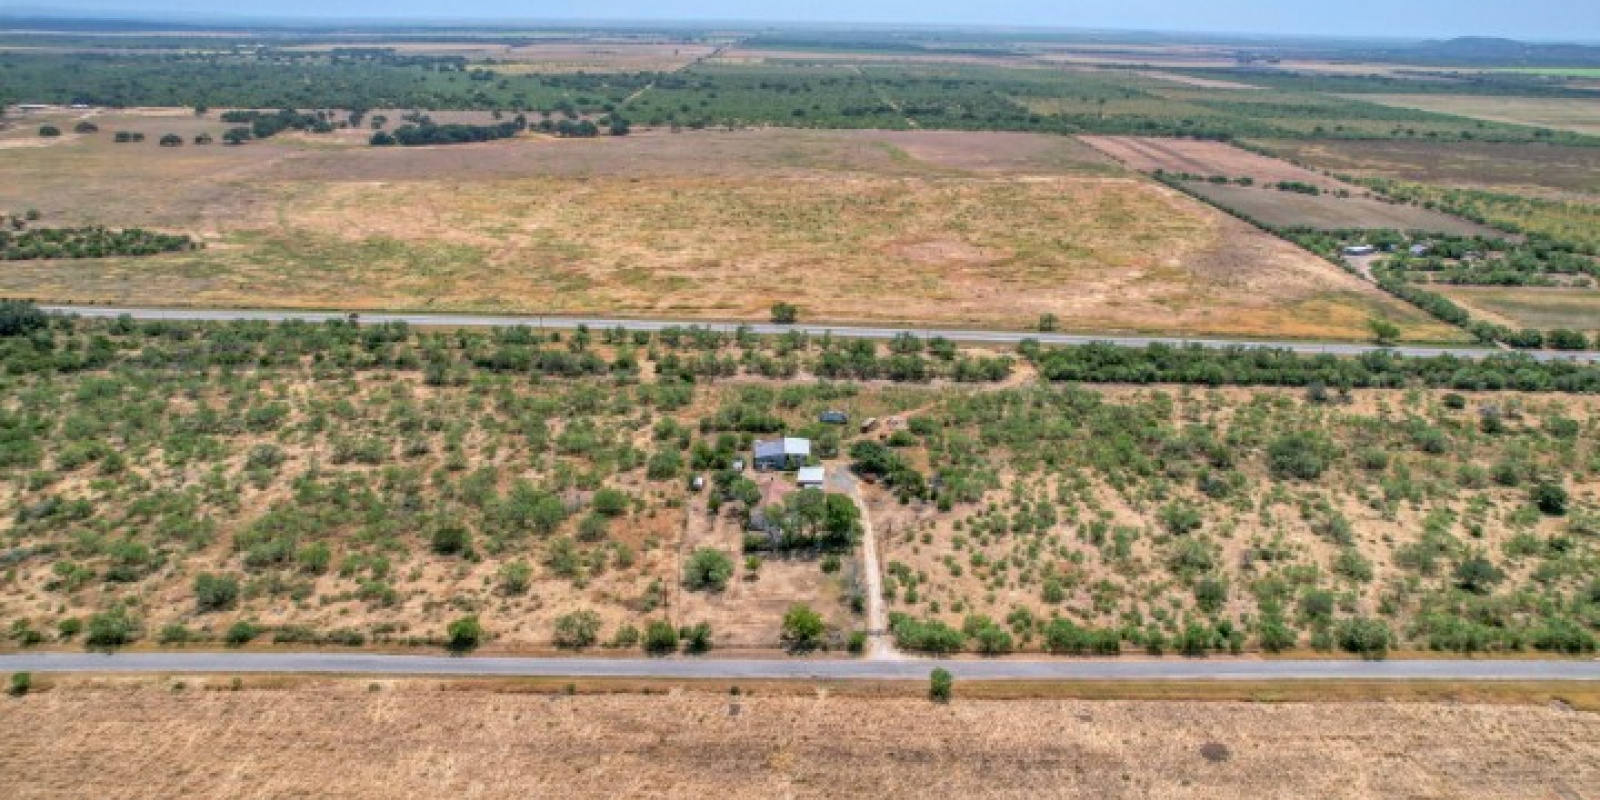 486 CR 429, Uvalde, 78801, 5 Bedrooms Bedrooms, 11 Rooms Rooms,3 BathroomsBathrooms,Farm and Ranch,For Sale,CR 429,1,1126